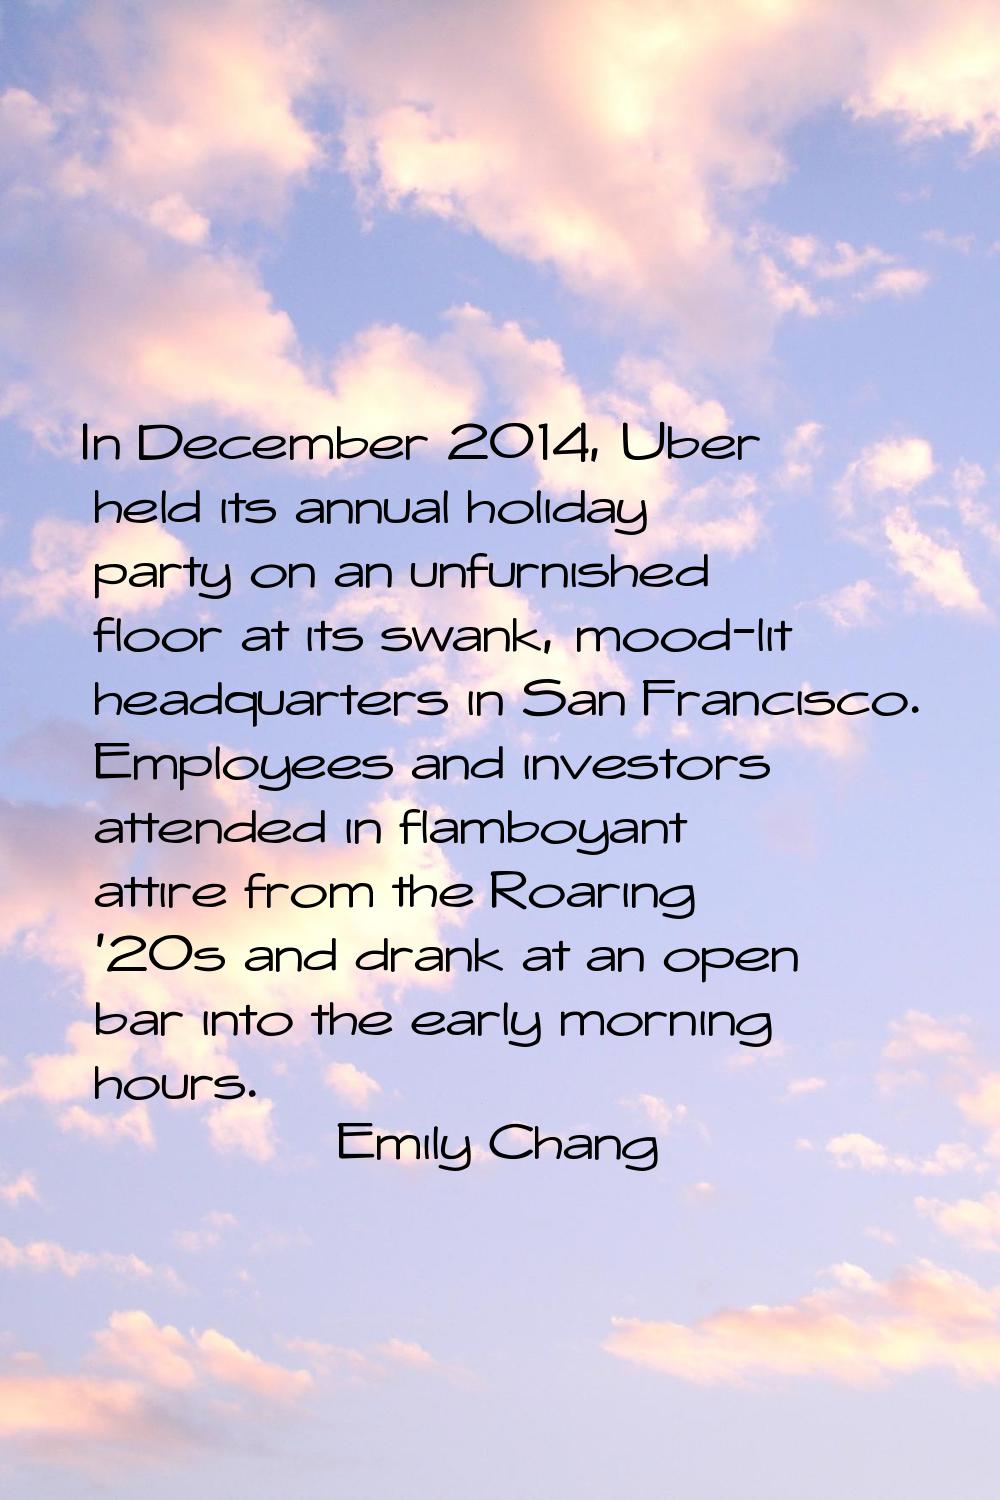 In December 2014, Uber held its annual holiday party on an unfurnished floor at its swank, mood-lit